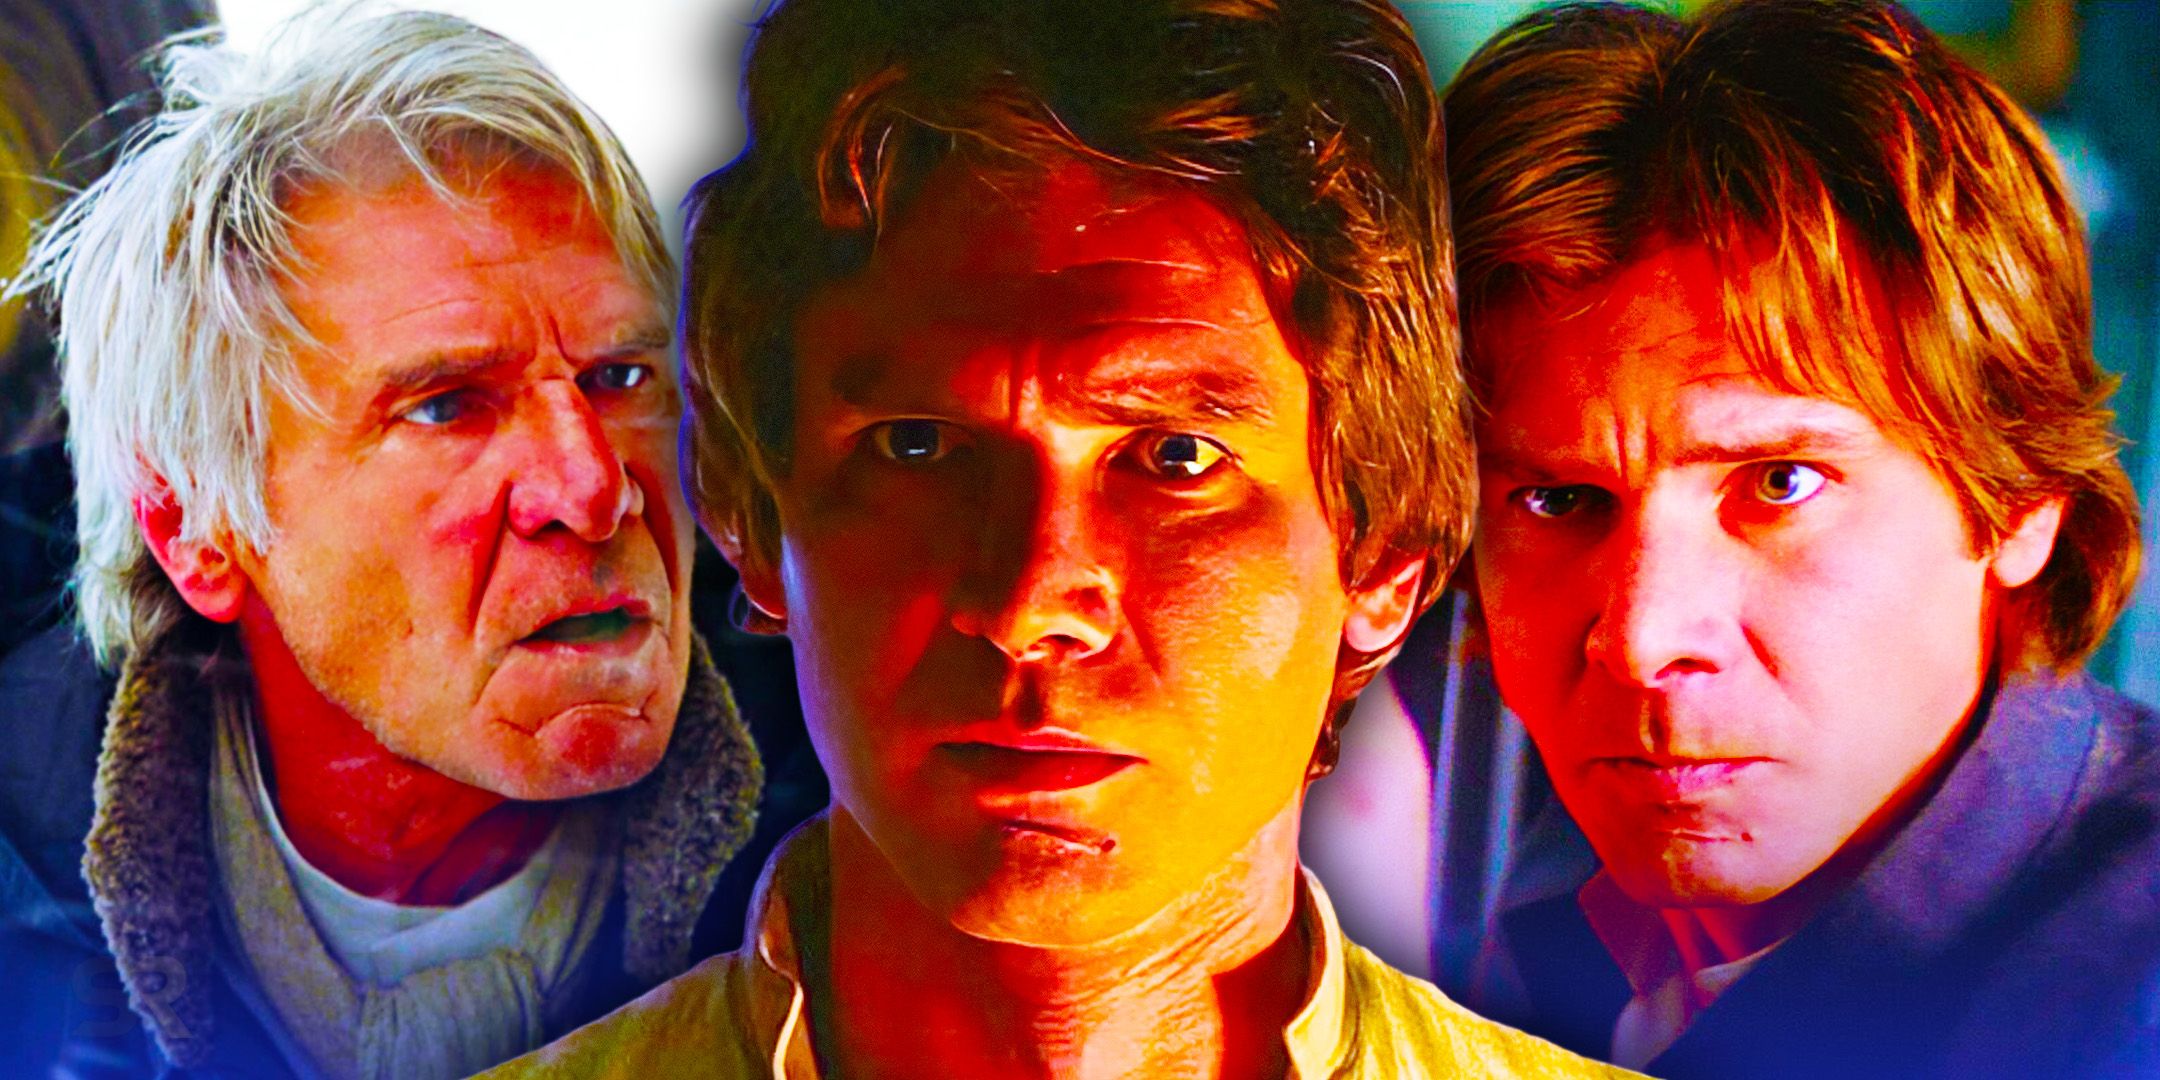 Han Solo from the Force Awakens looking angry to the left and Han Solo from the original trilogy looking serious in the center and to the right in a combined image